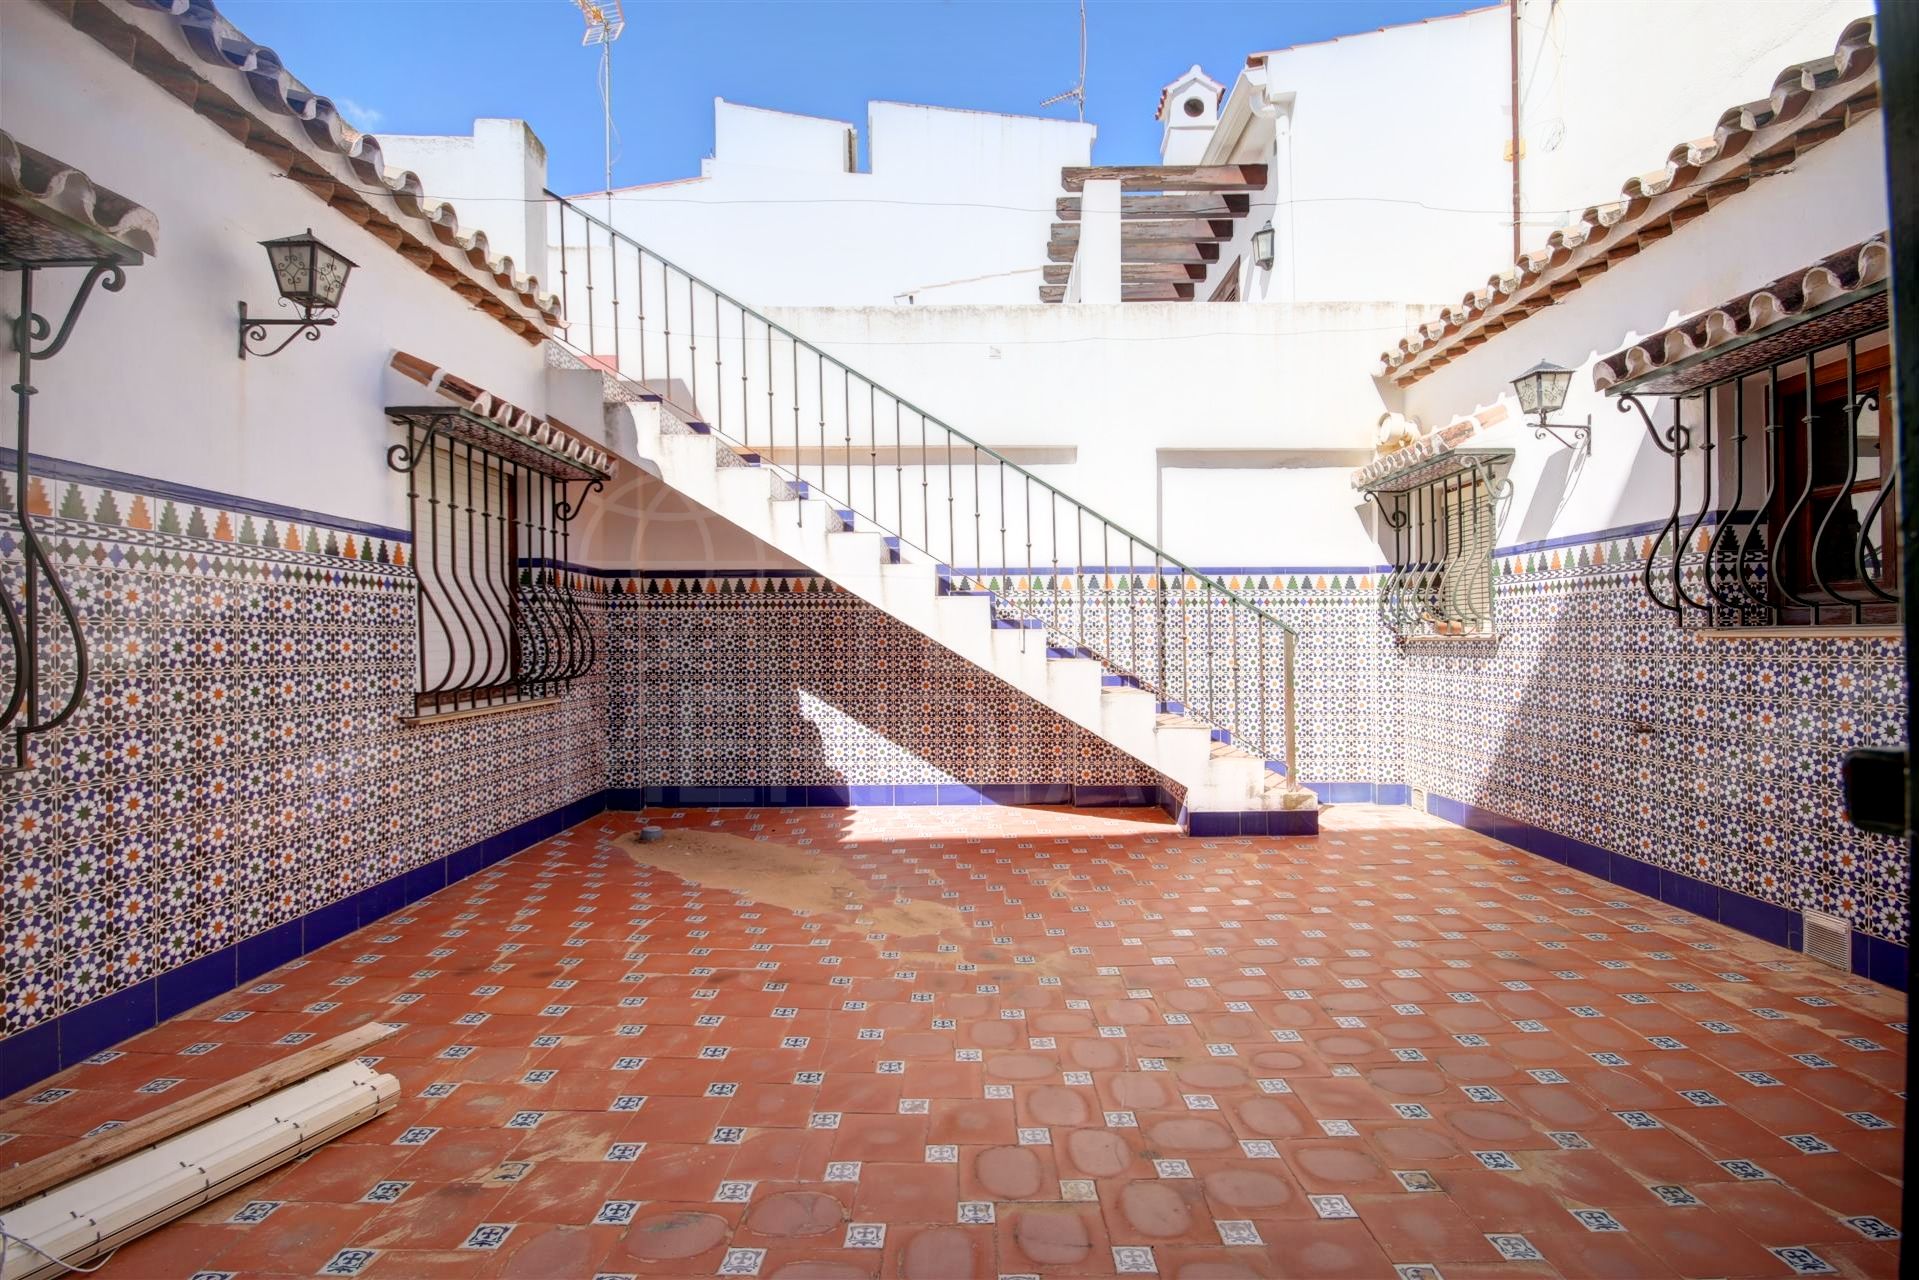 Townhouse with andalusian patio, solarium and private garage for sale in the old town of Estepona